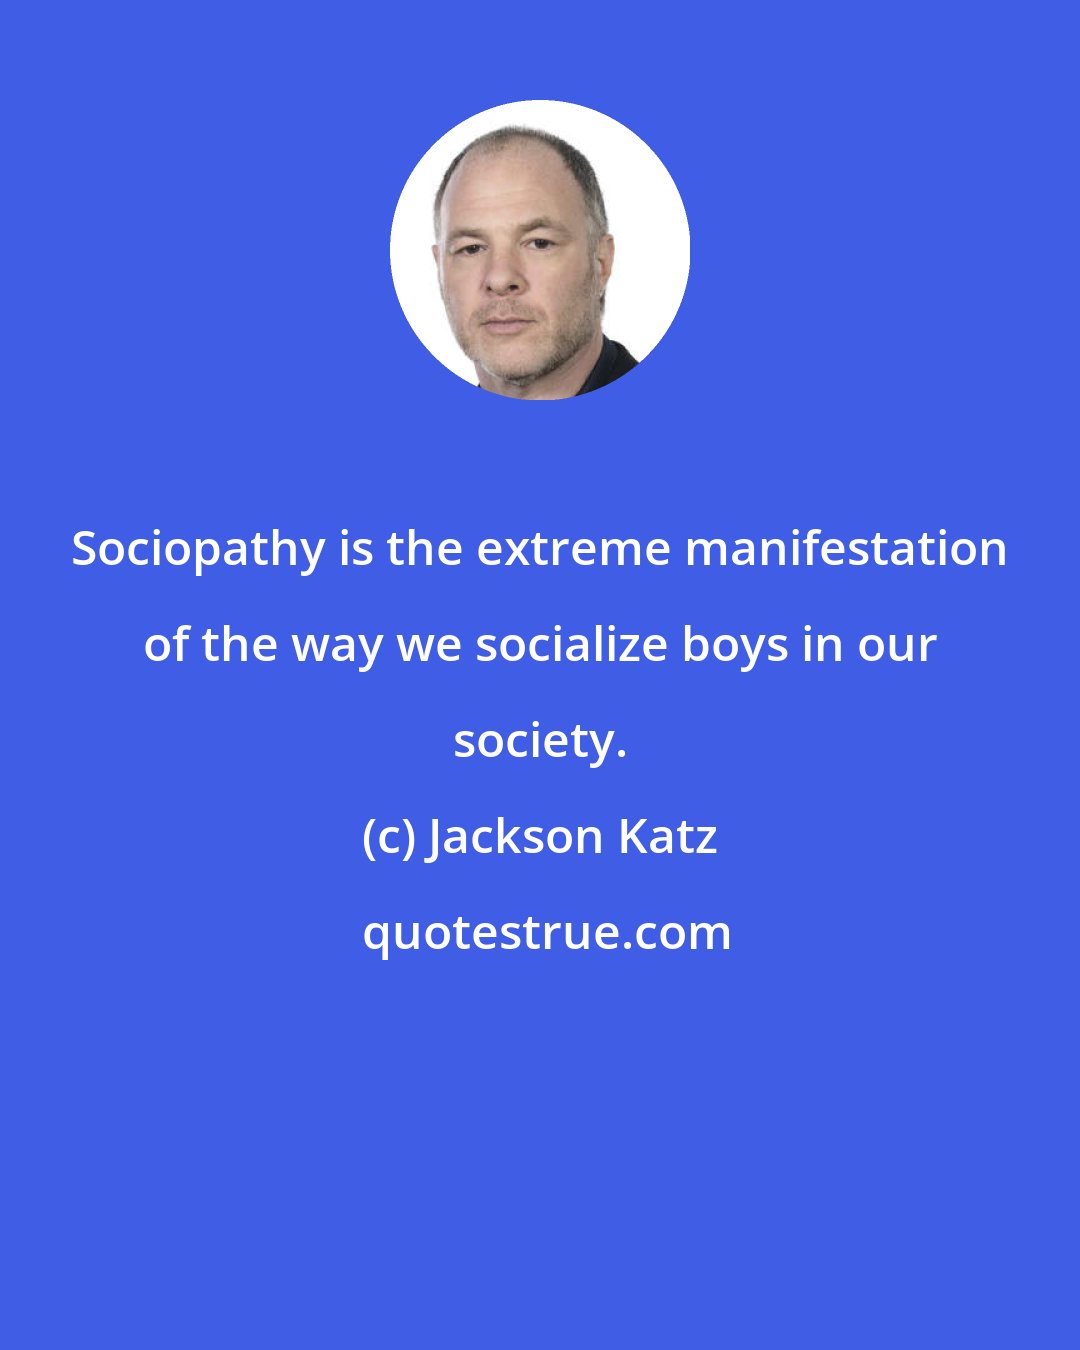 Jackson Katz: Sociopathy is the extreme manifestation of the way we socialize boys in our society.